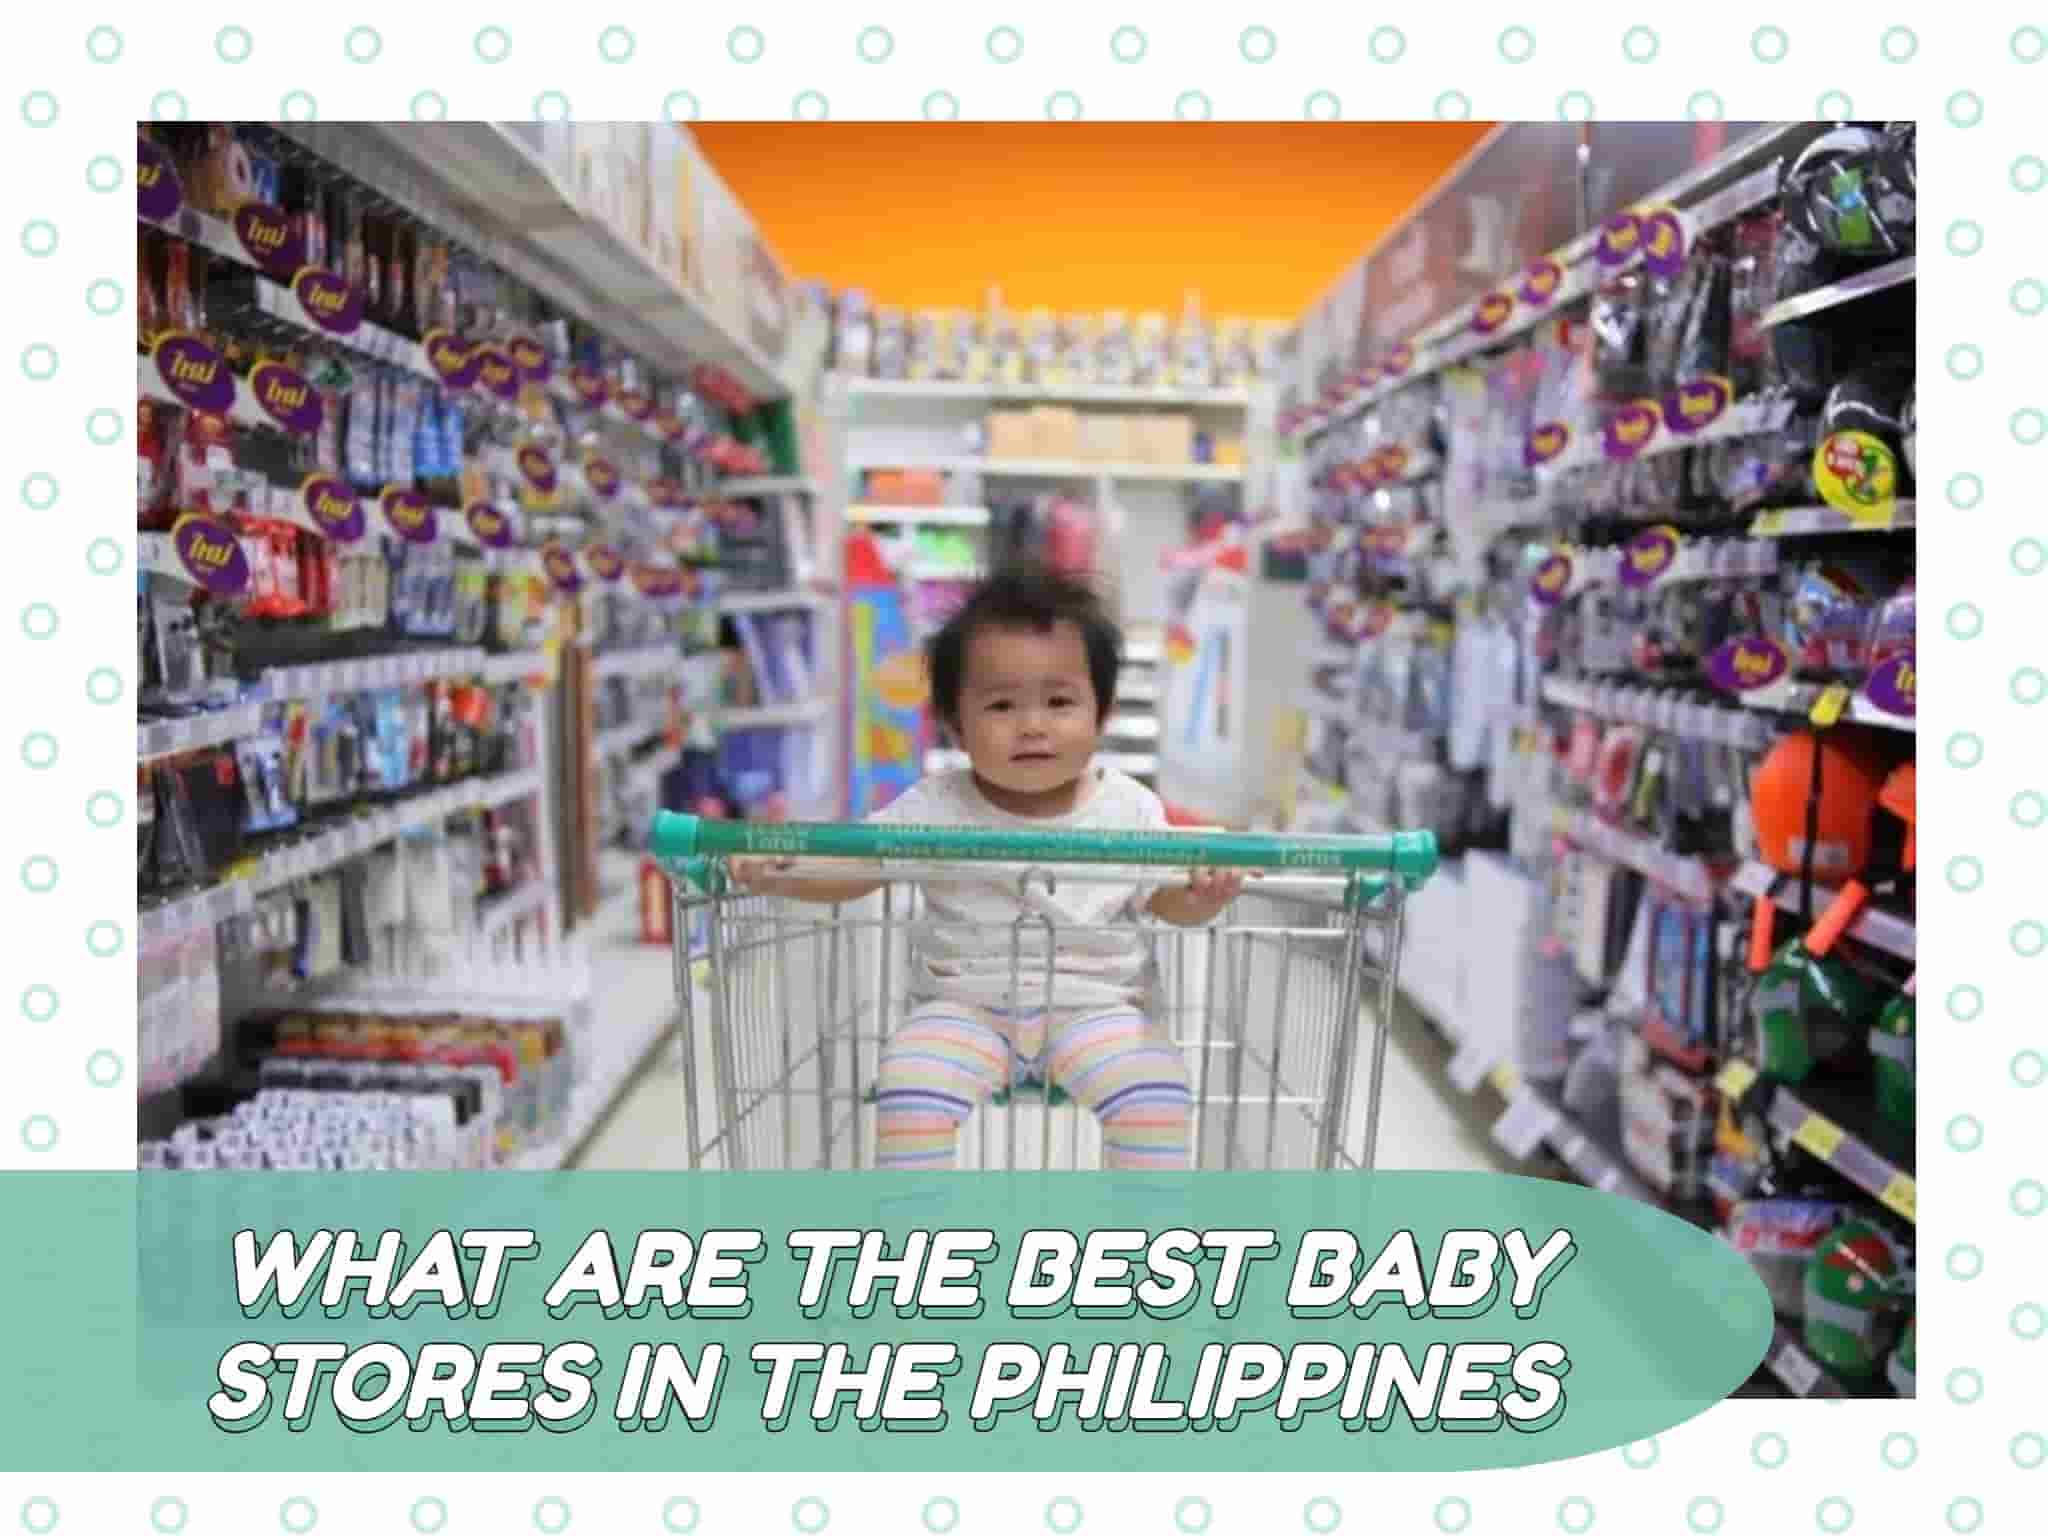 What are the Best Baby Stores in the Philippines?